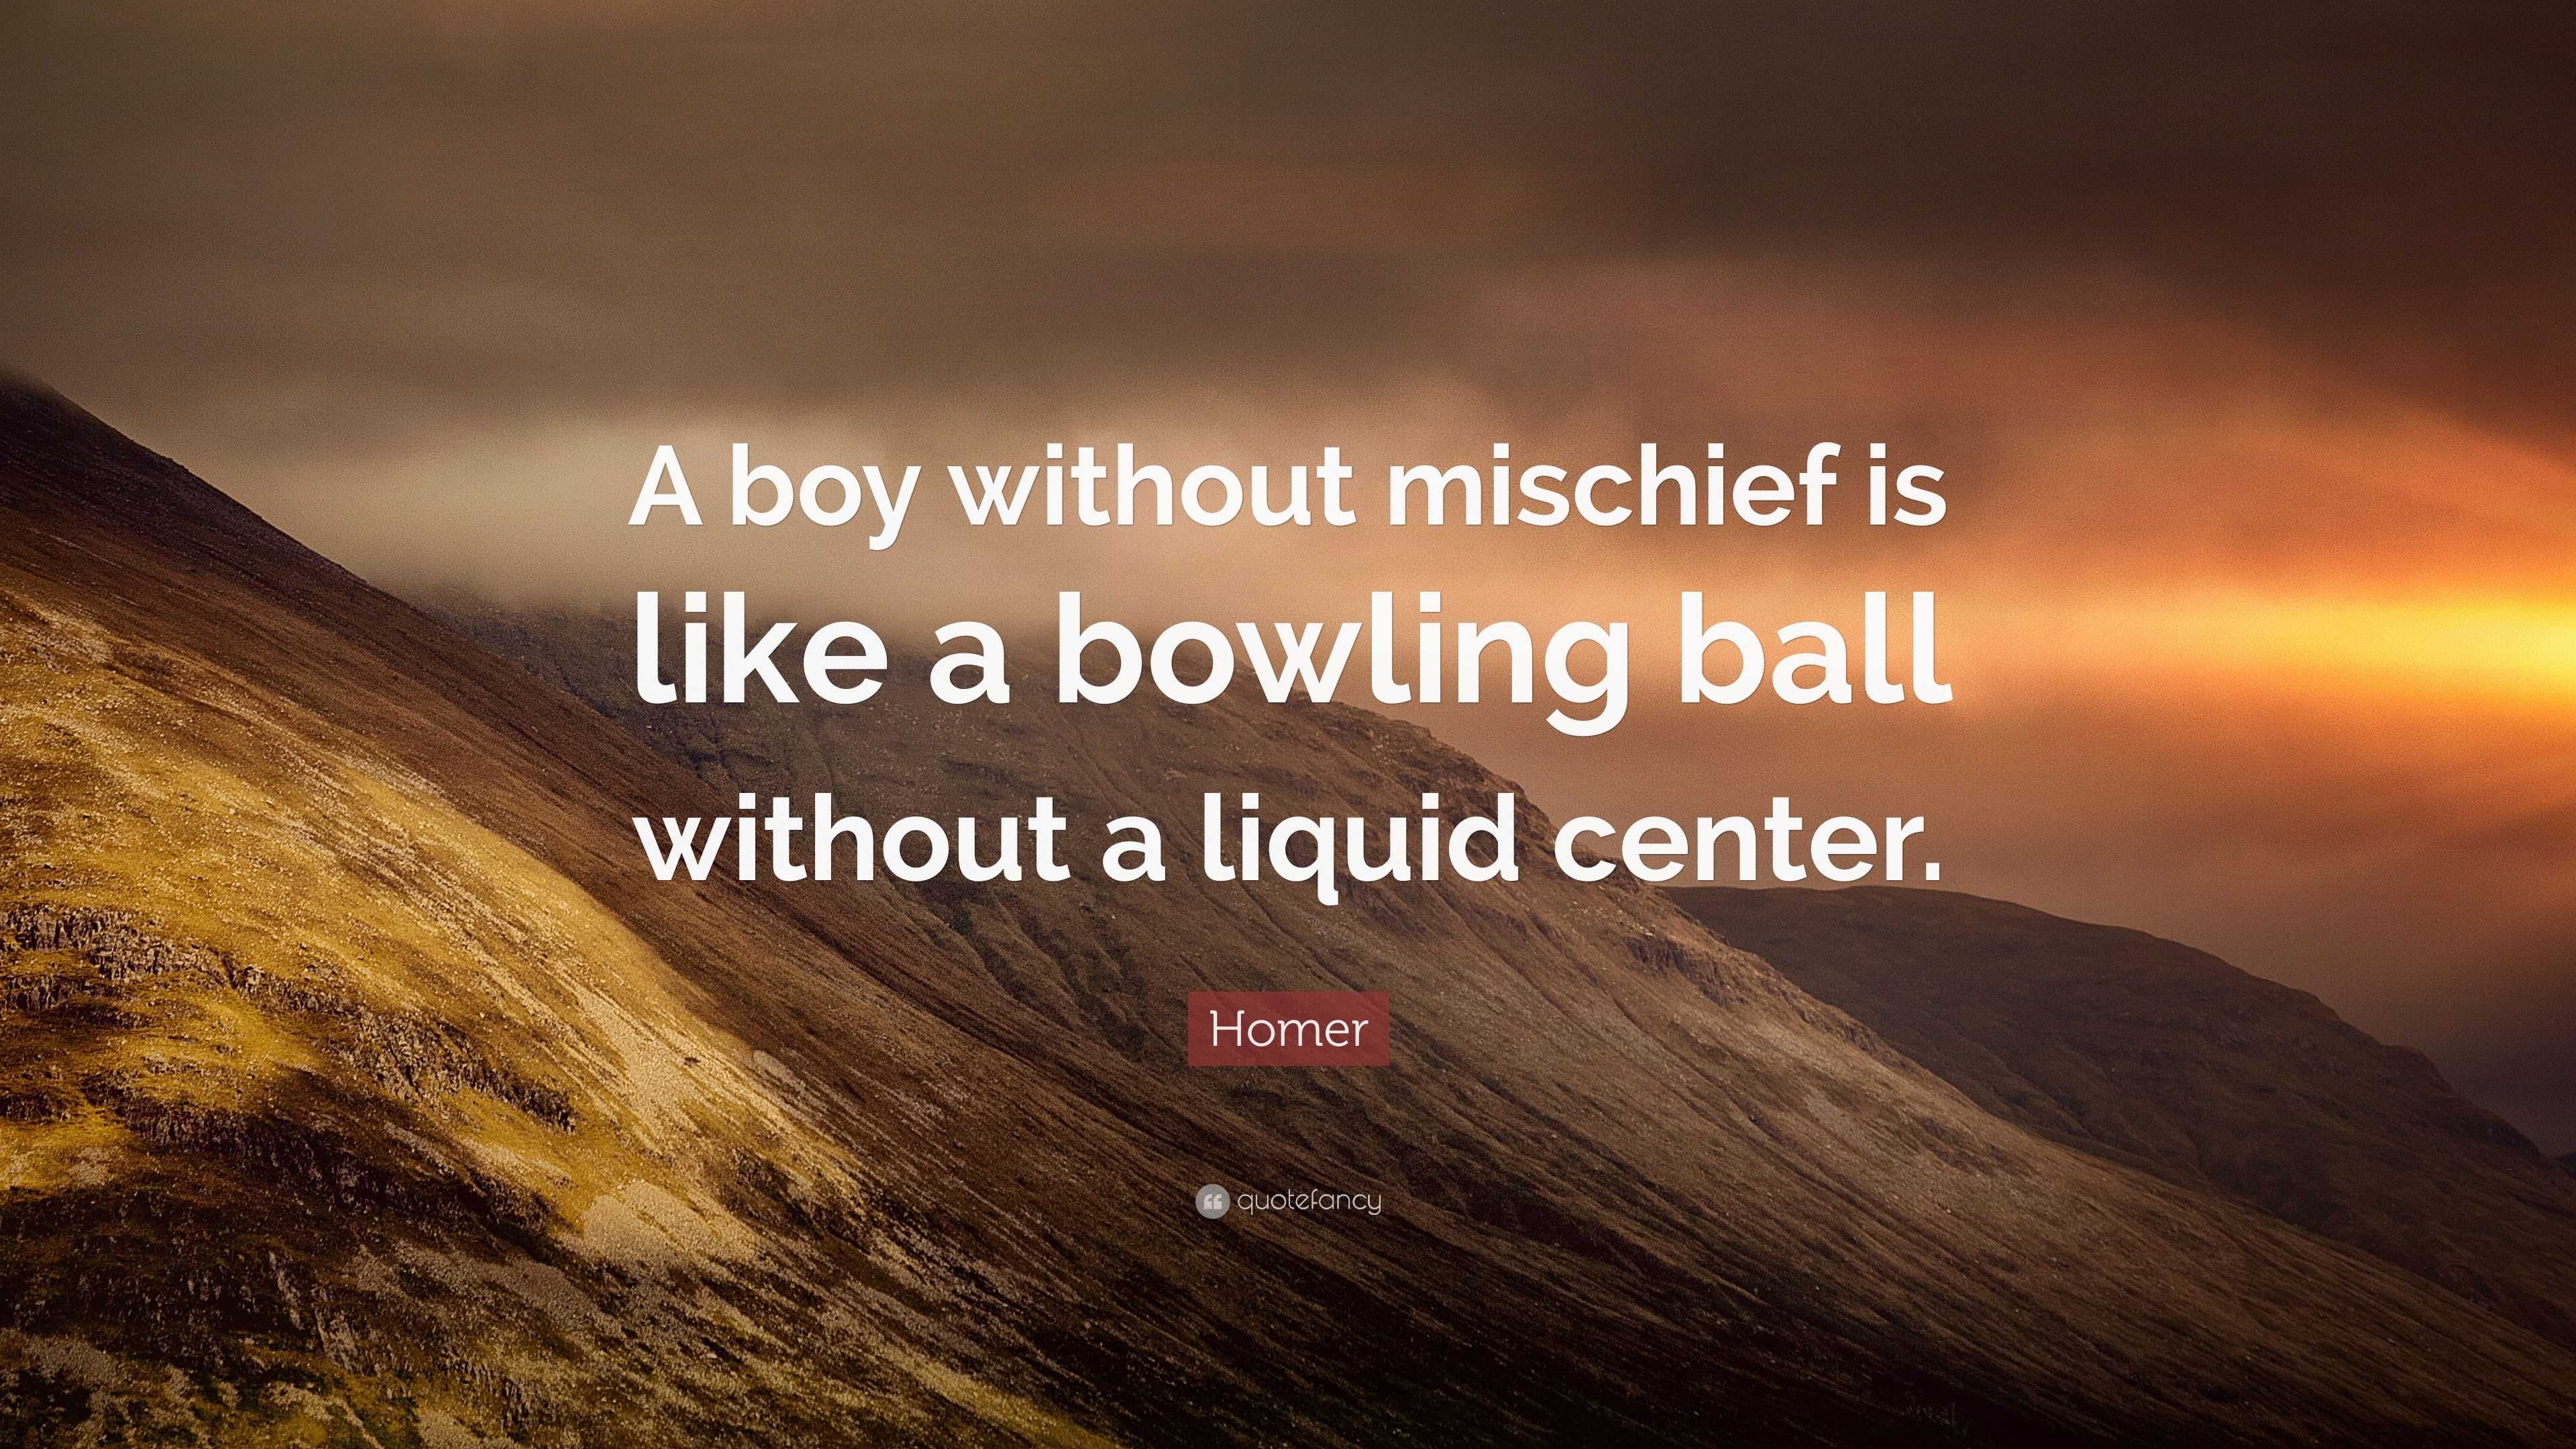 Homer Quote: “A boy without mischief is like a bowling ball